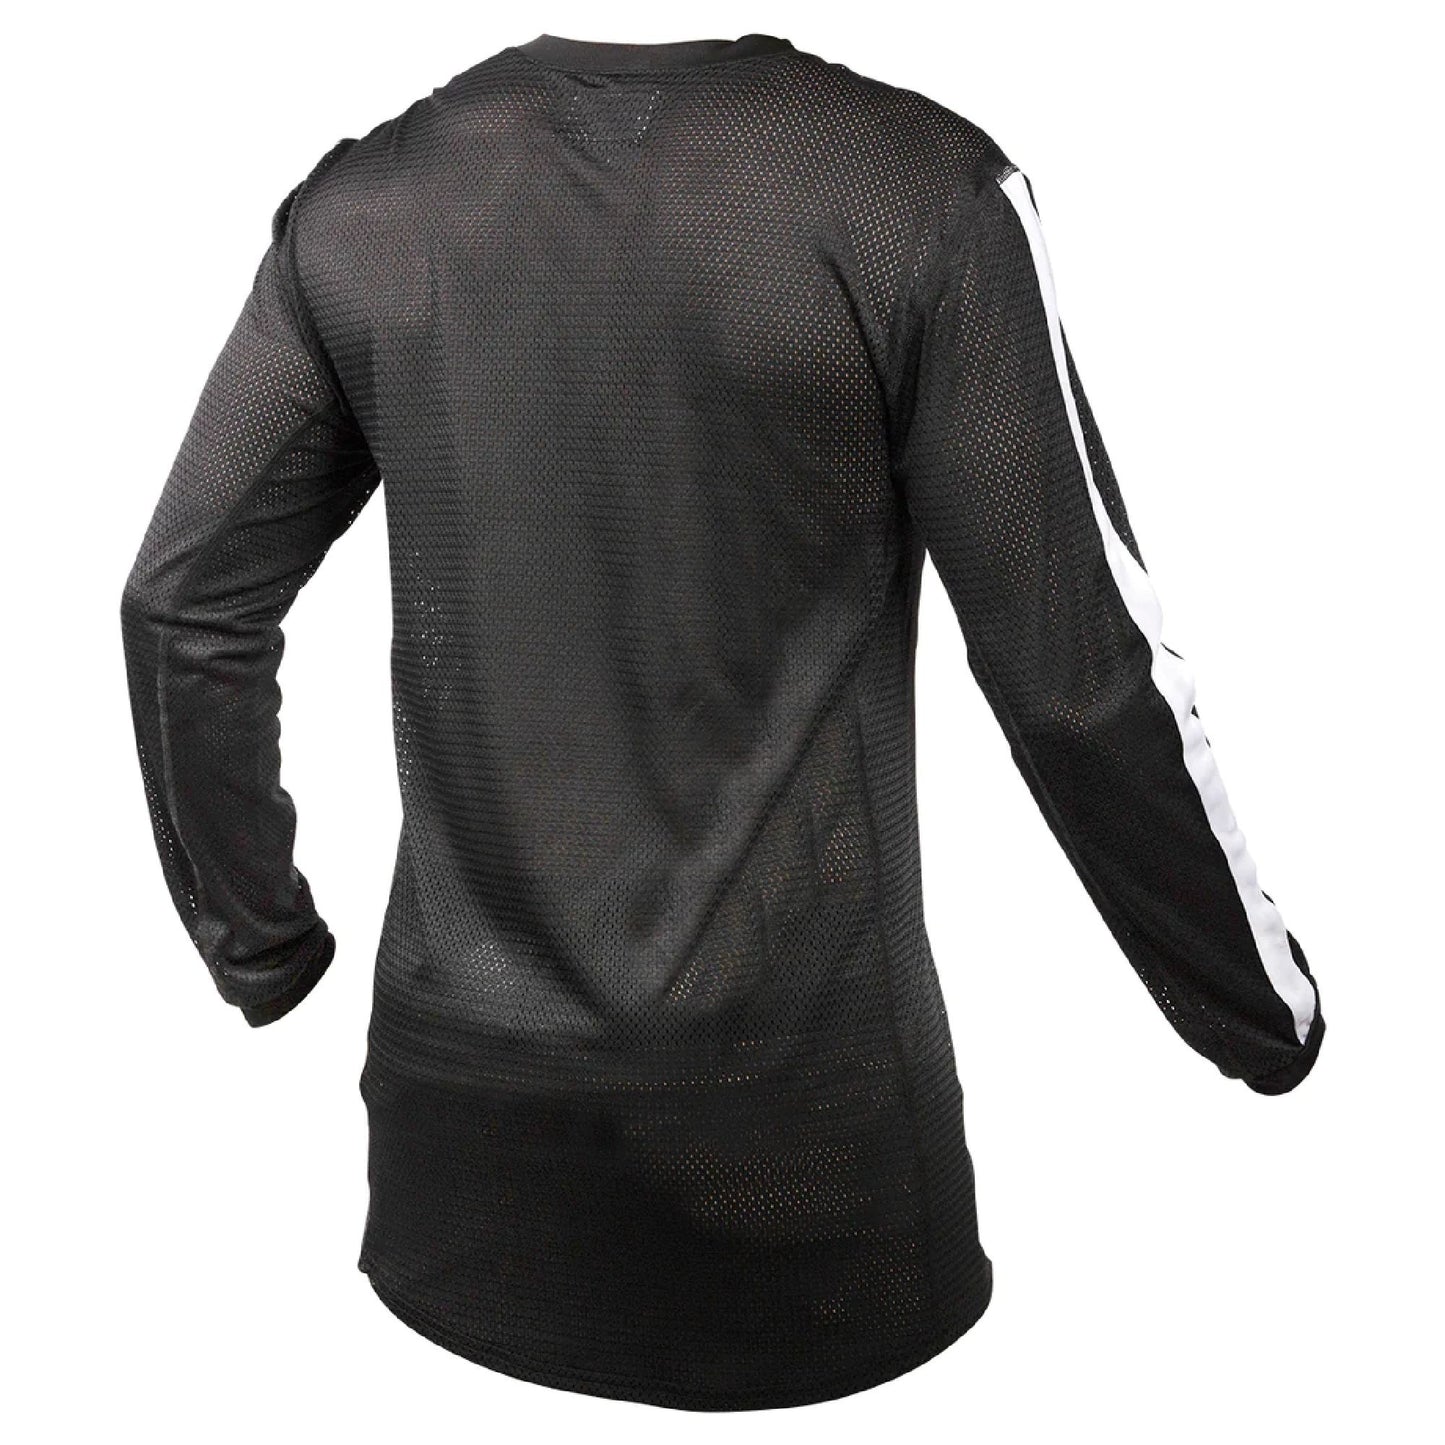 Fasthouse USA Originals Air Cooled Jersey Black - Fasthouse Bike Jerseys